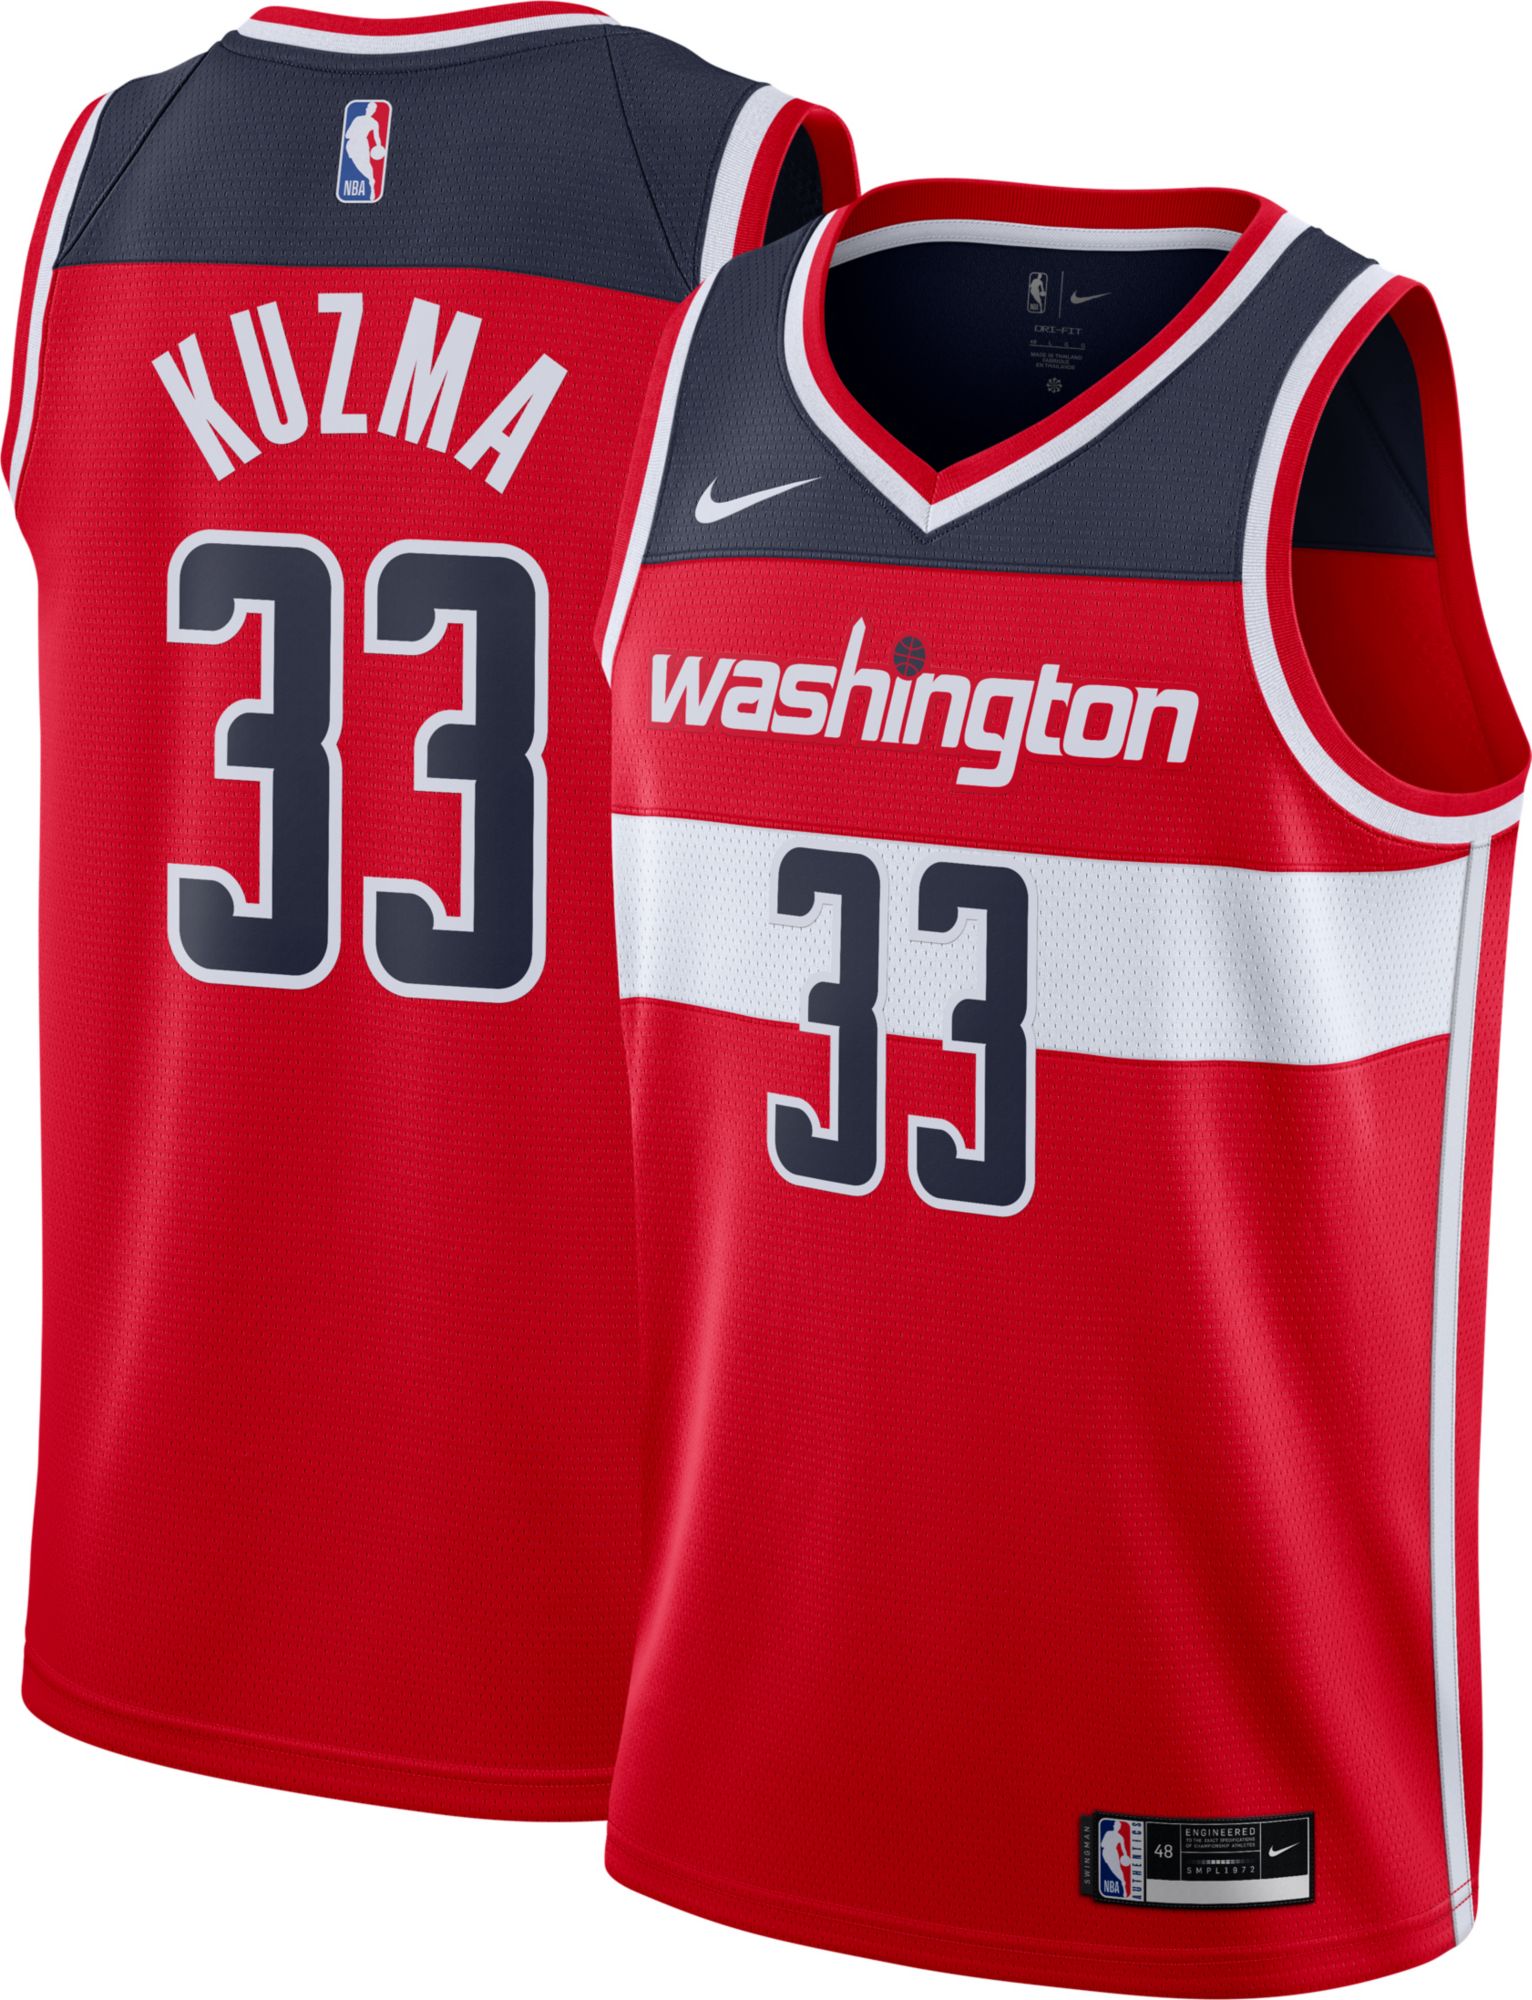 Kyle Kuzma  Basketball jersey outfit, Mens outfits, Nba jersey outfit